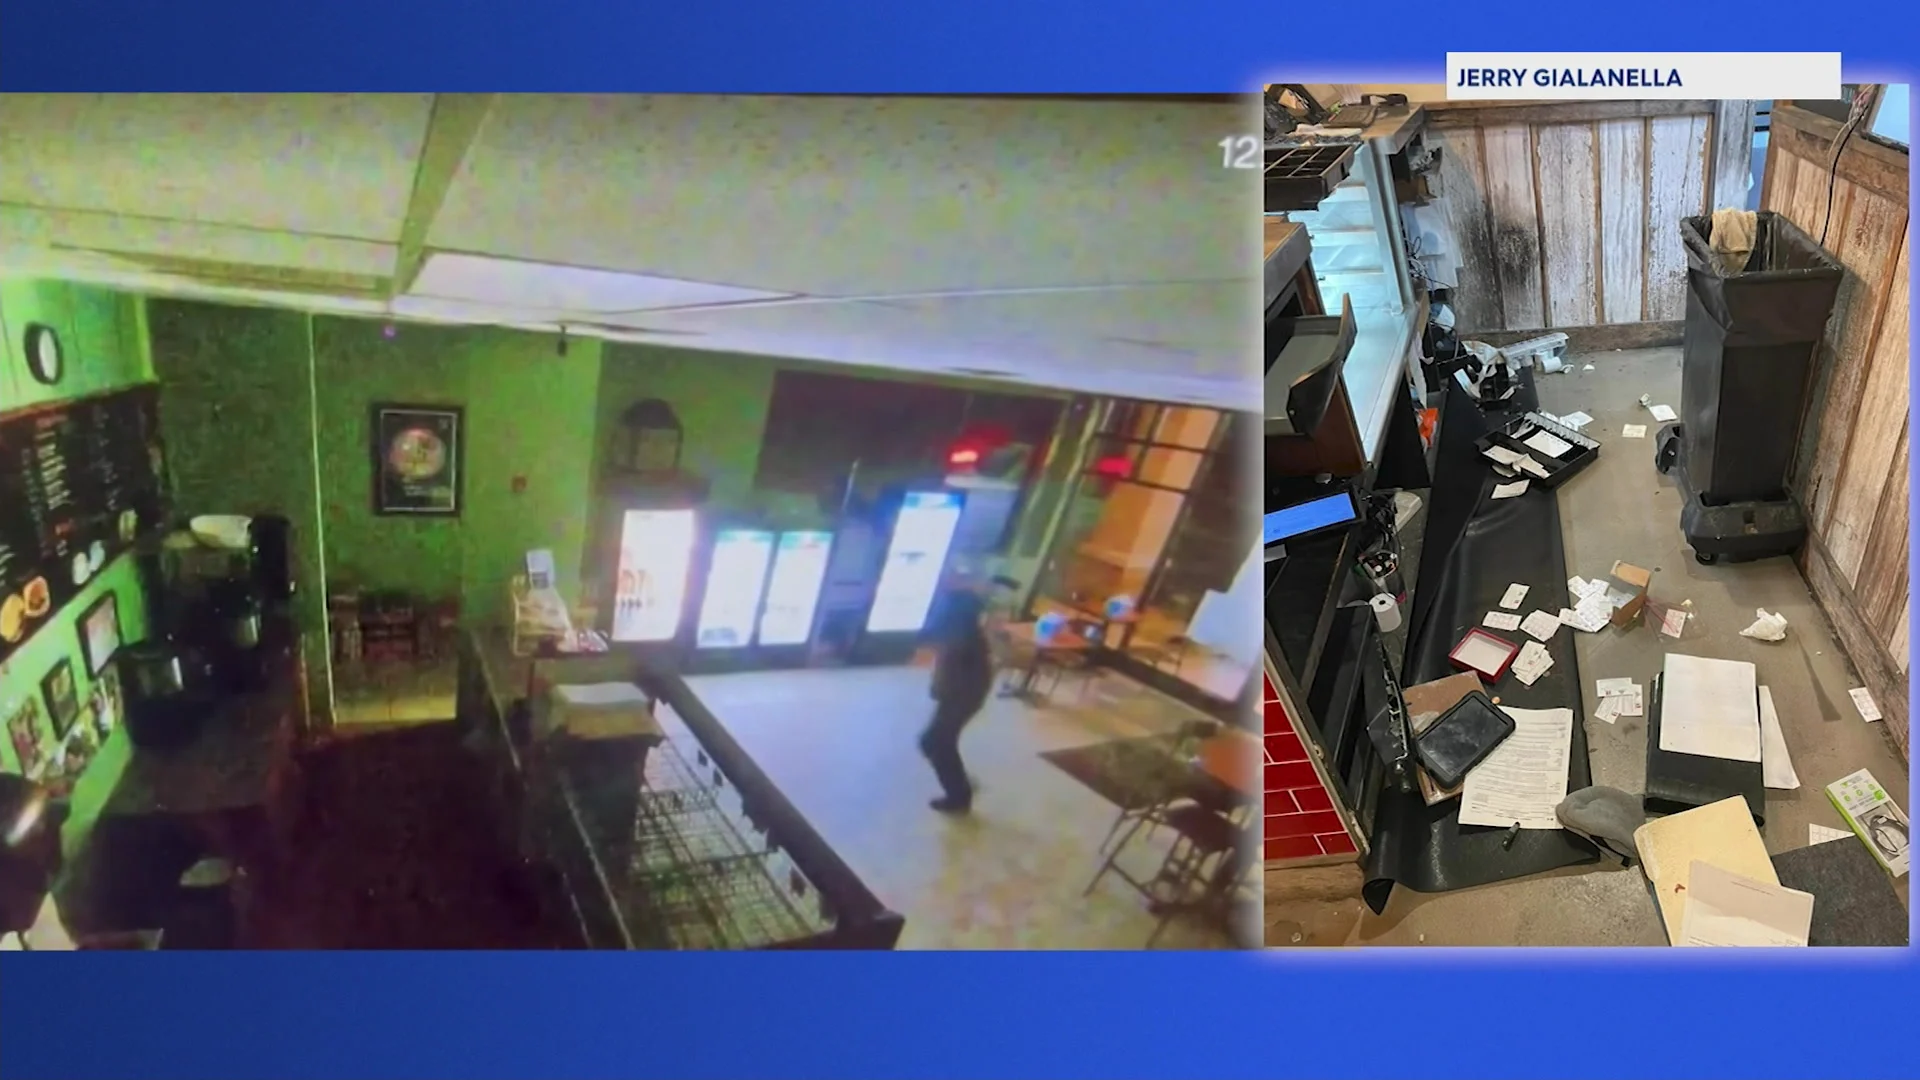 Police: Suspects wanted for 2 pizzeria burglaries in Toms River